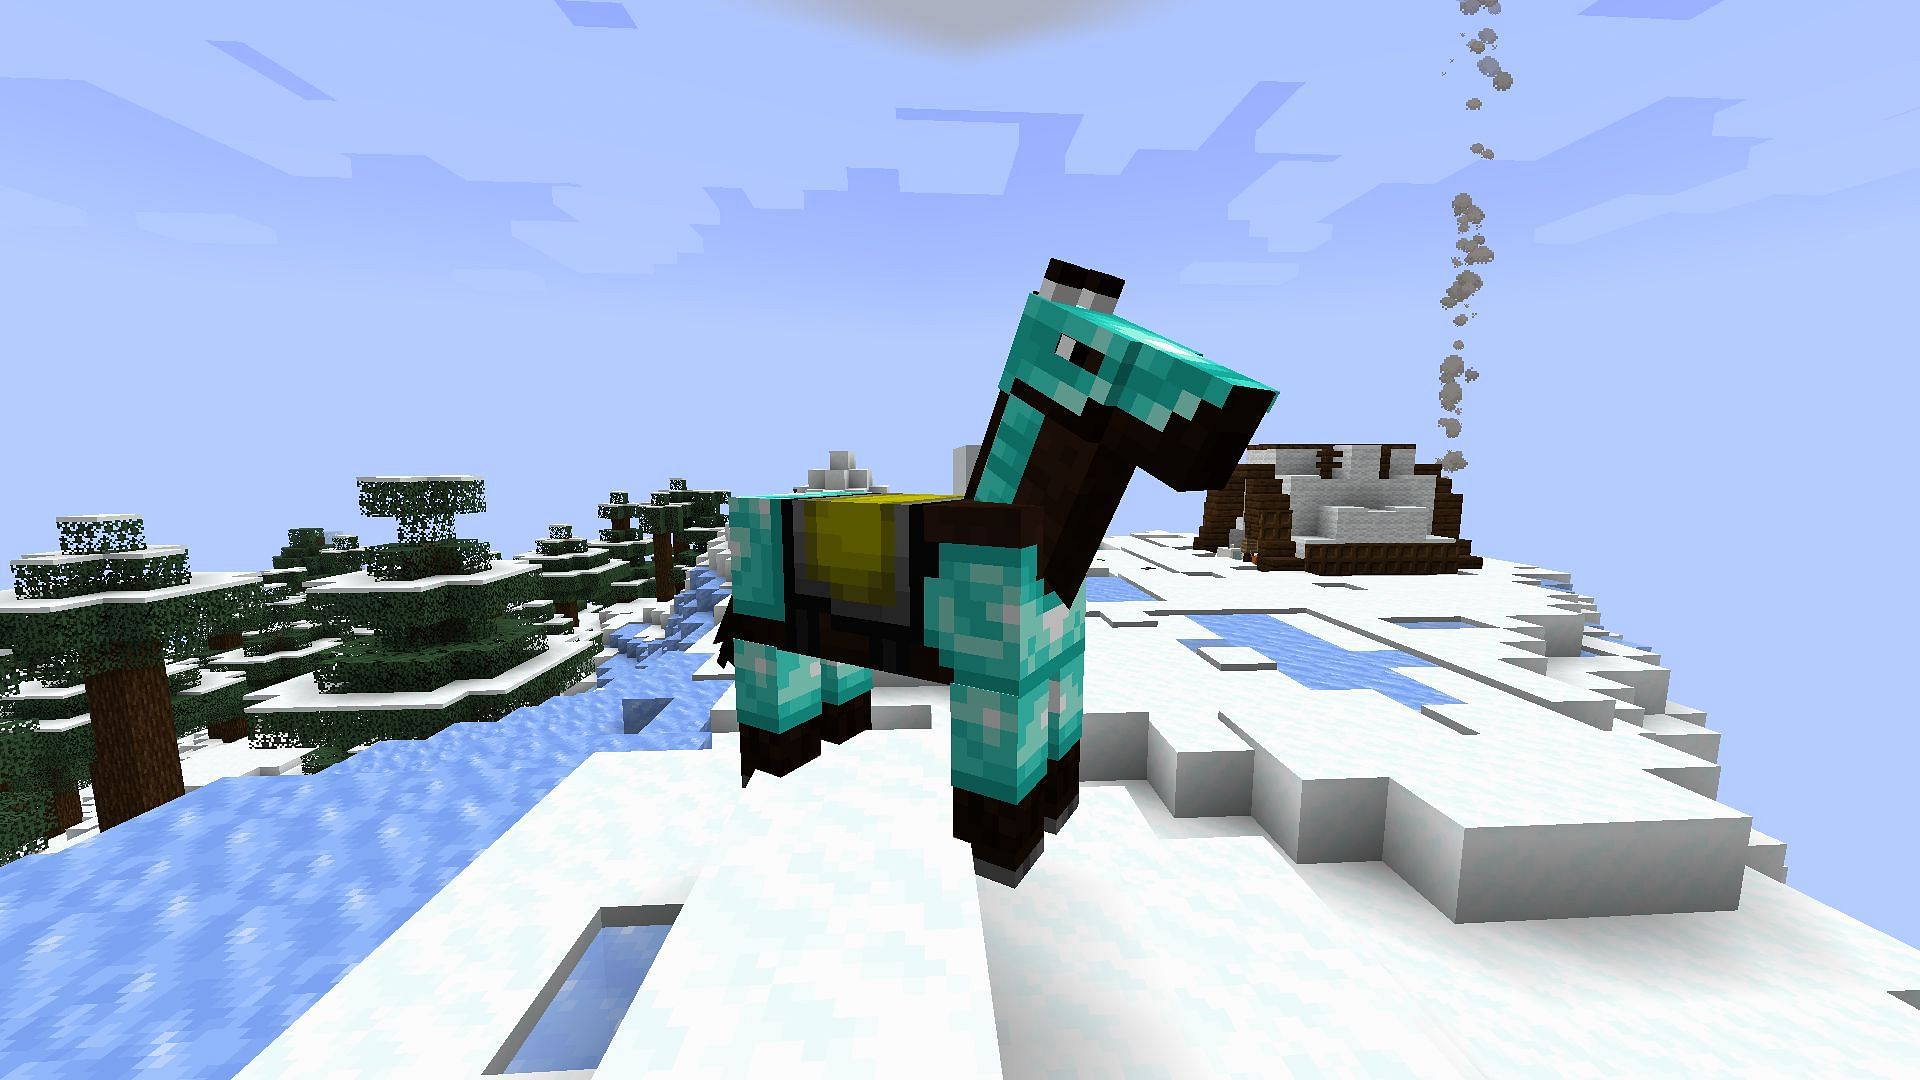 Horses are already quite advanced, they can still receive a few features (Image via Mojang Studios)